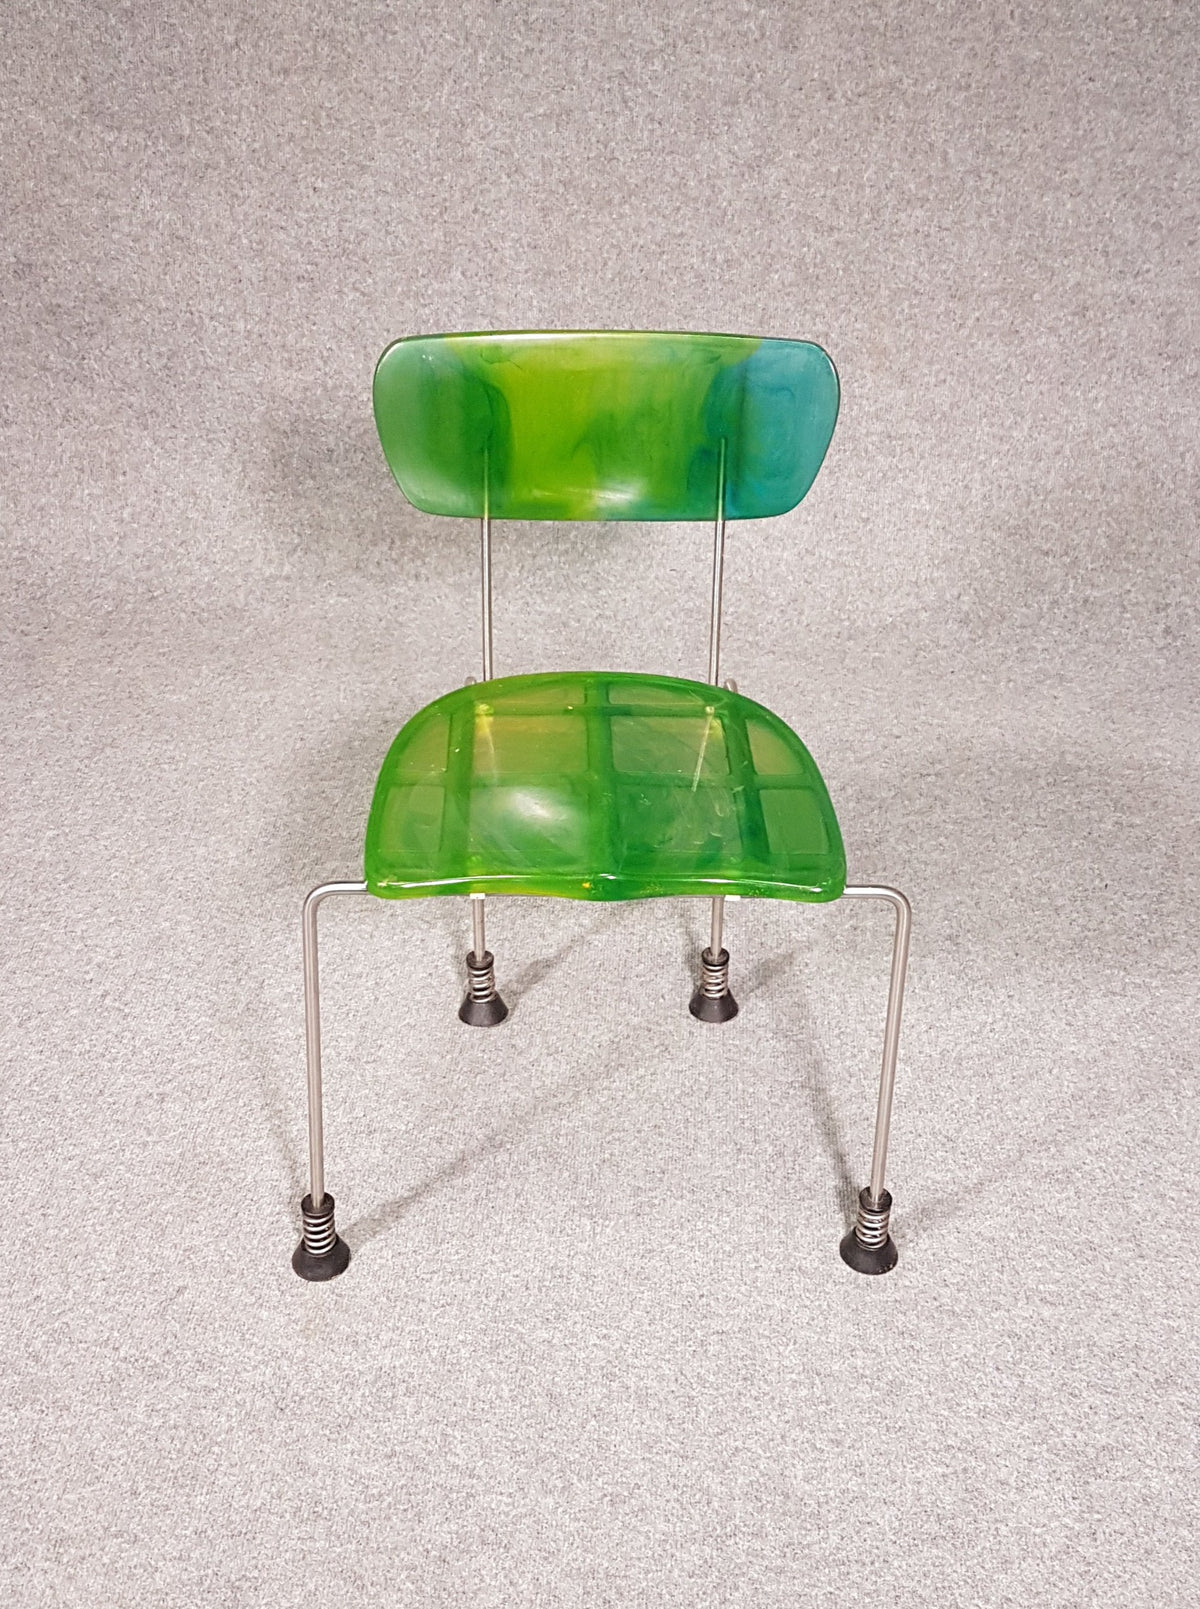 Sculptural “Broadway” chair designed by Gaetano Pesce for Bernini, in 1993